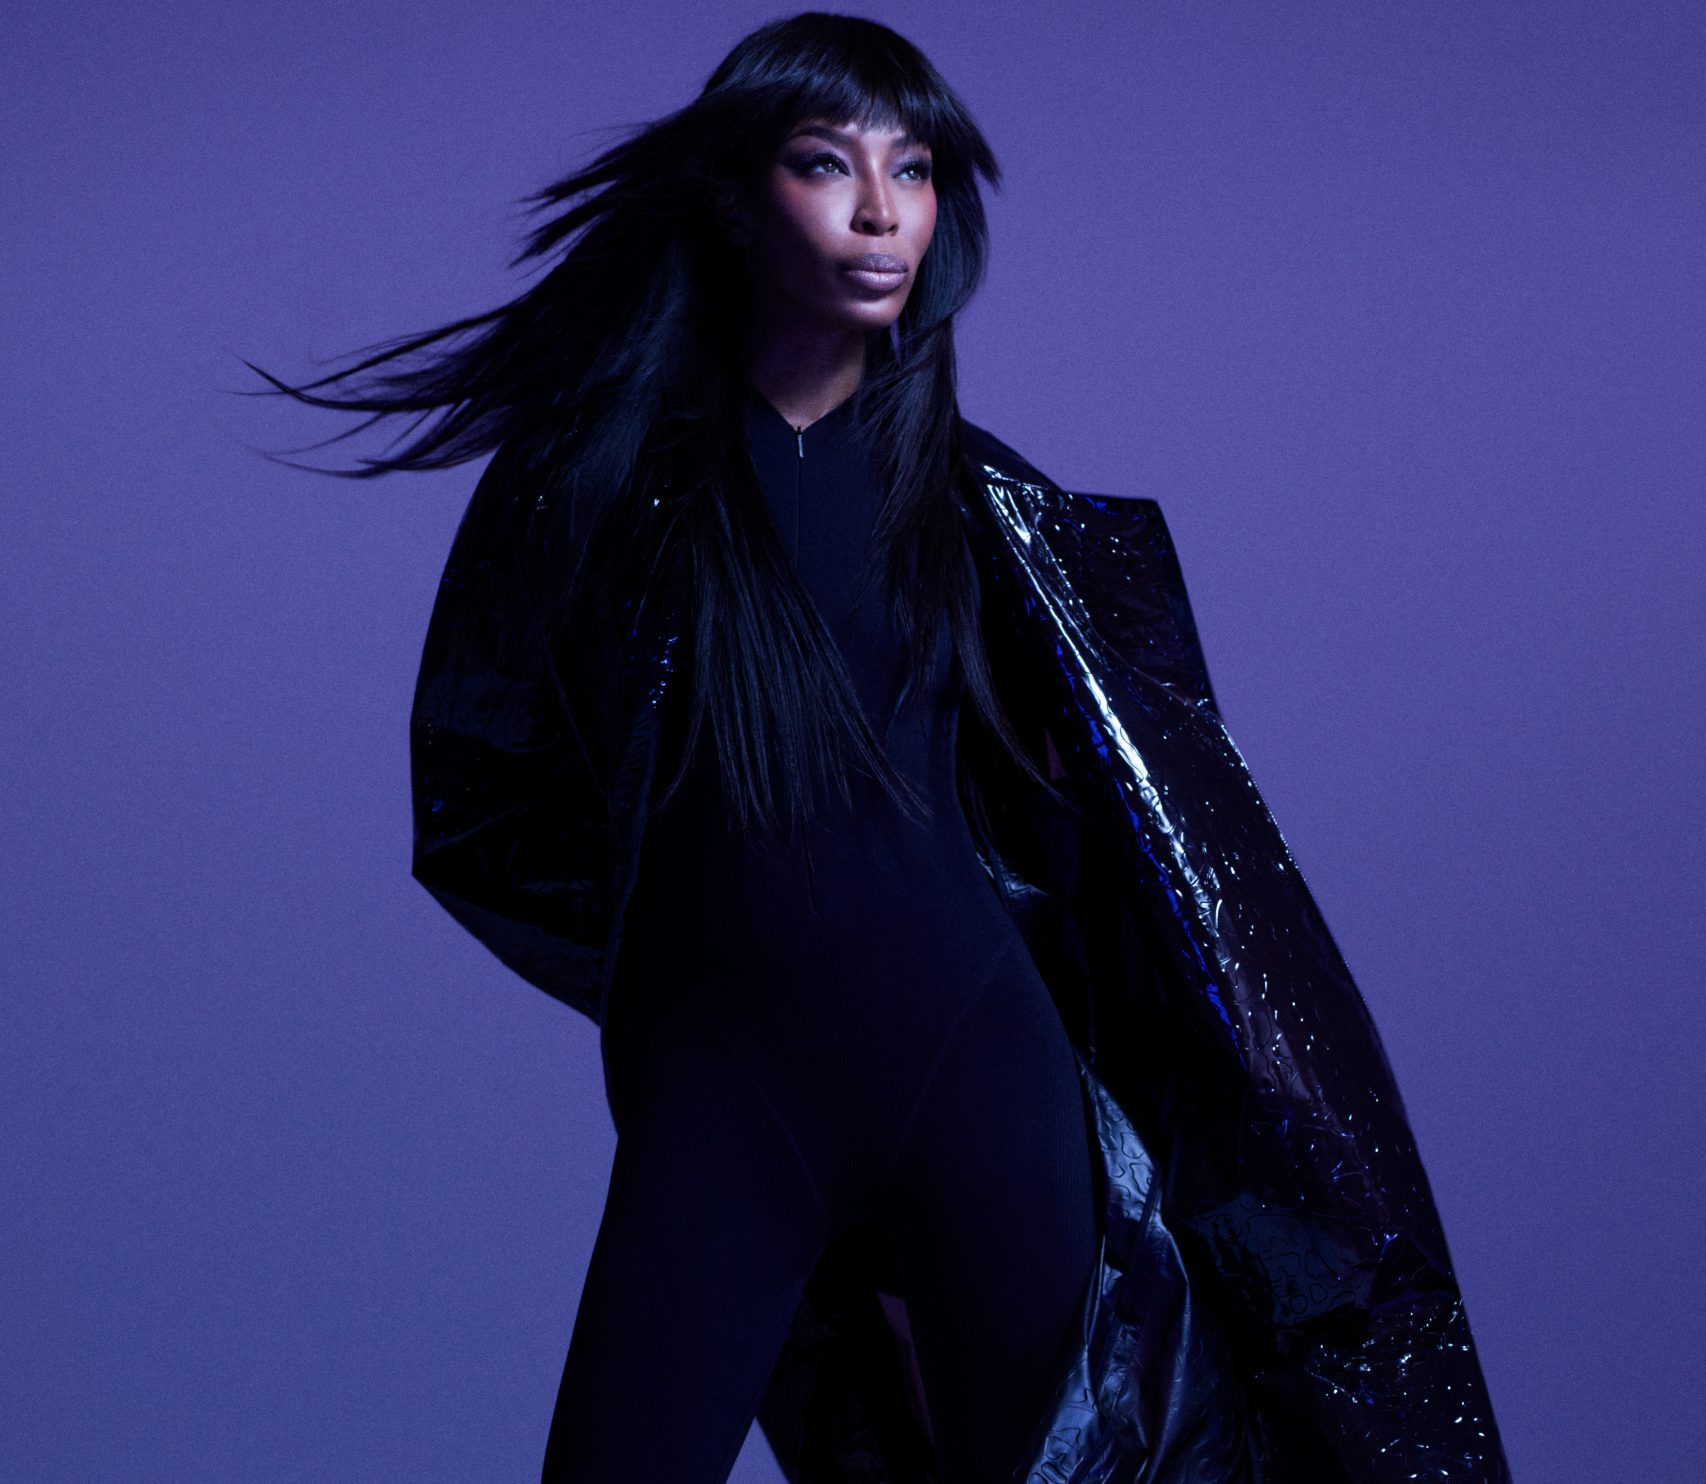 Naomi x BOSS collection launch image